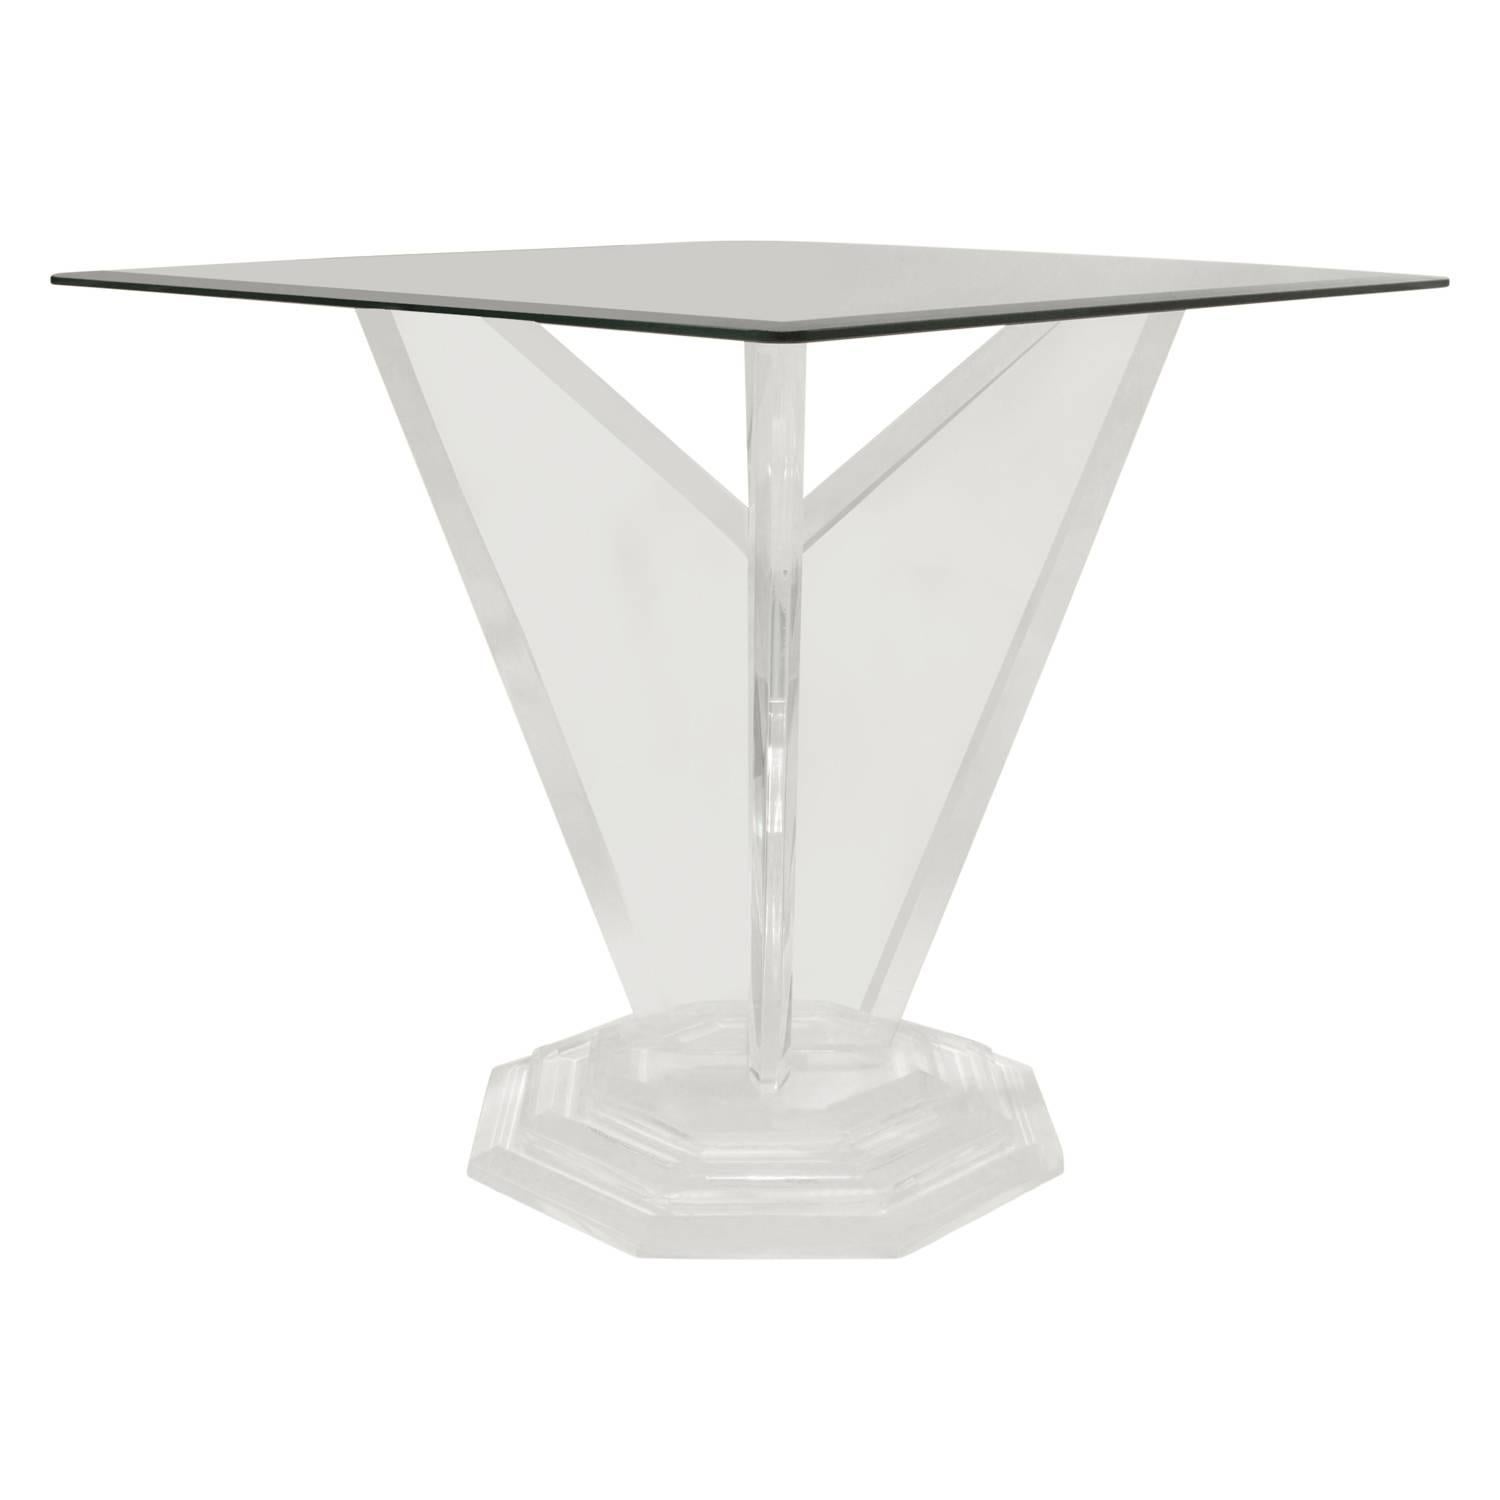 Hand-Crafted Sculptural Lucite Side Table with Stepped Base, 1970s